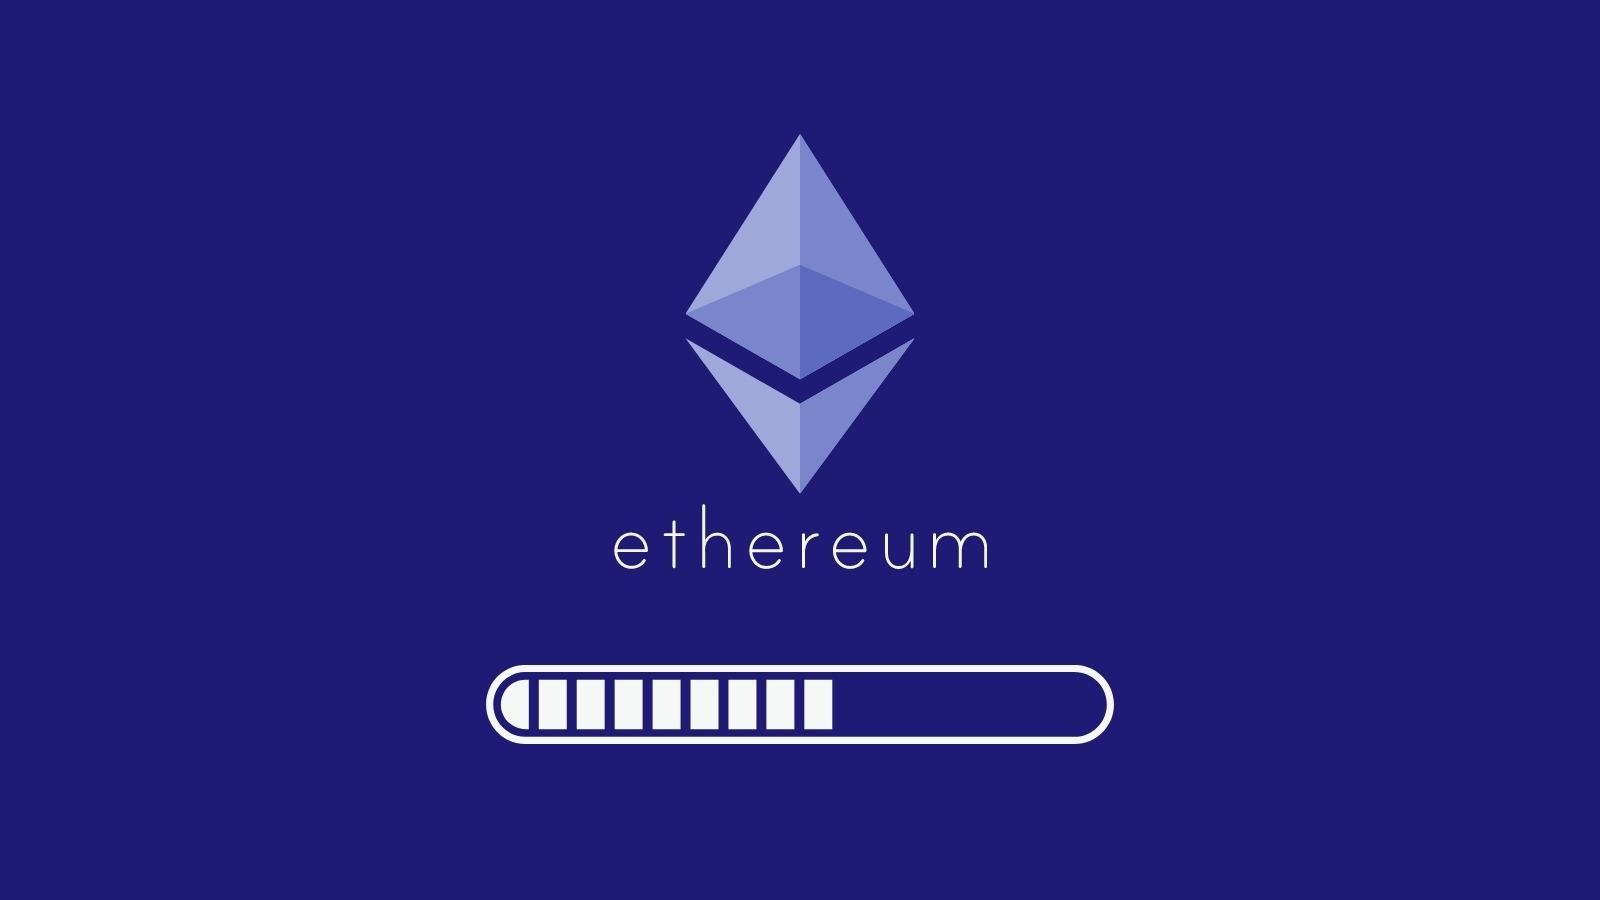 Ethereum completed its long-awaited Merge upgrade